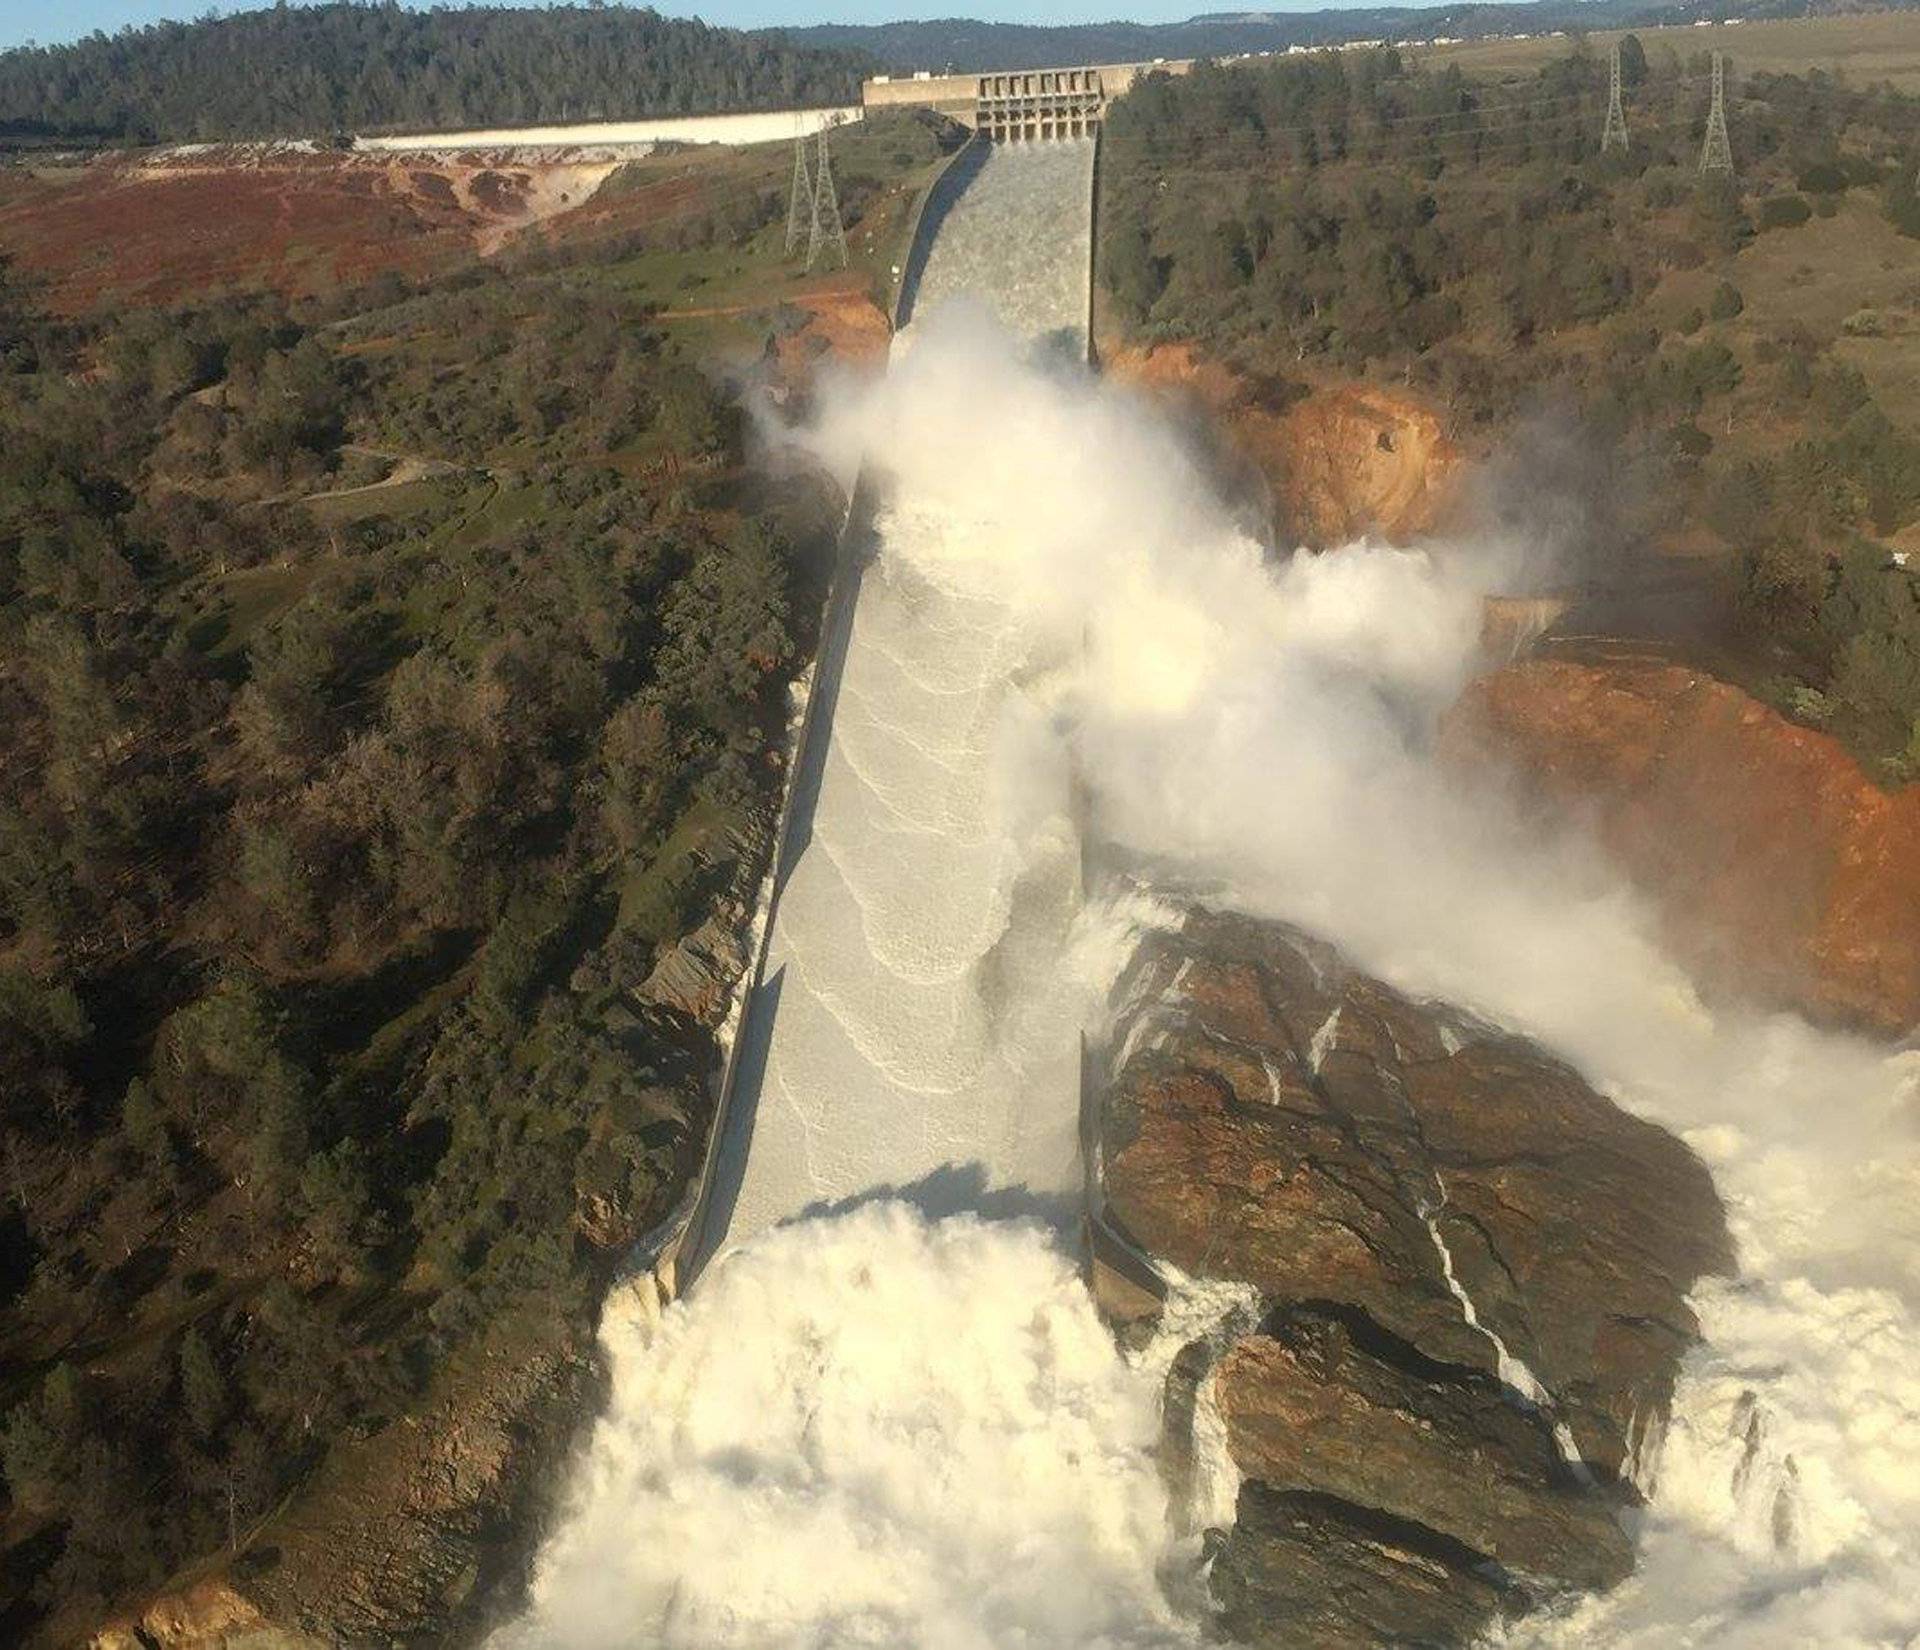 A damaged spillway with eroded hillside is seen in an aerial photo taken over the Oroville Dam in Oroville